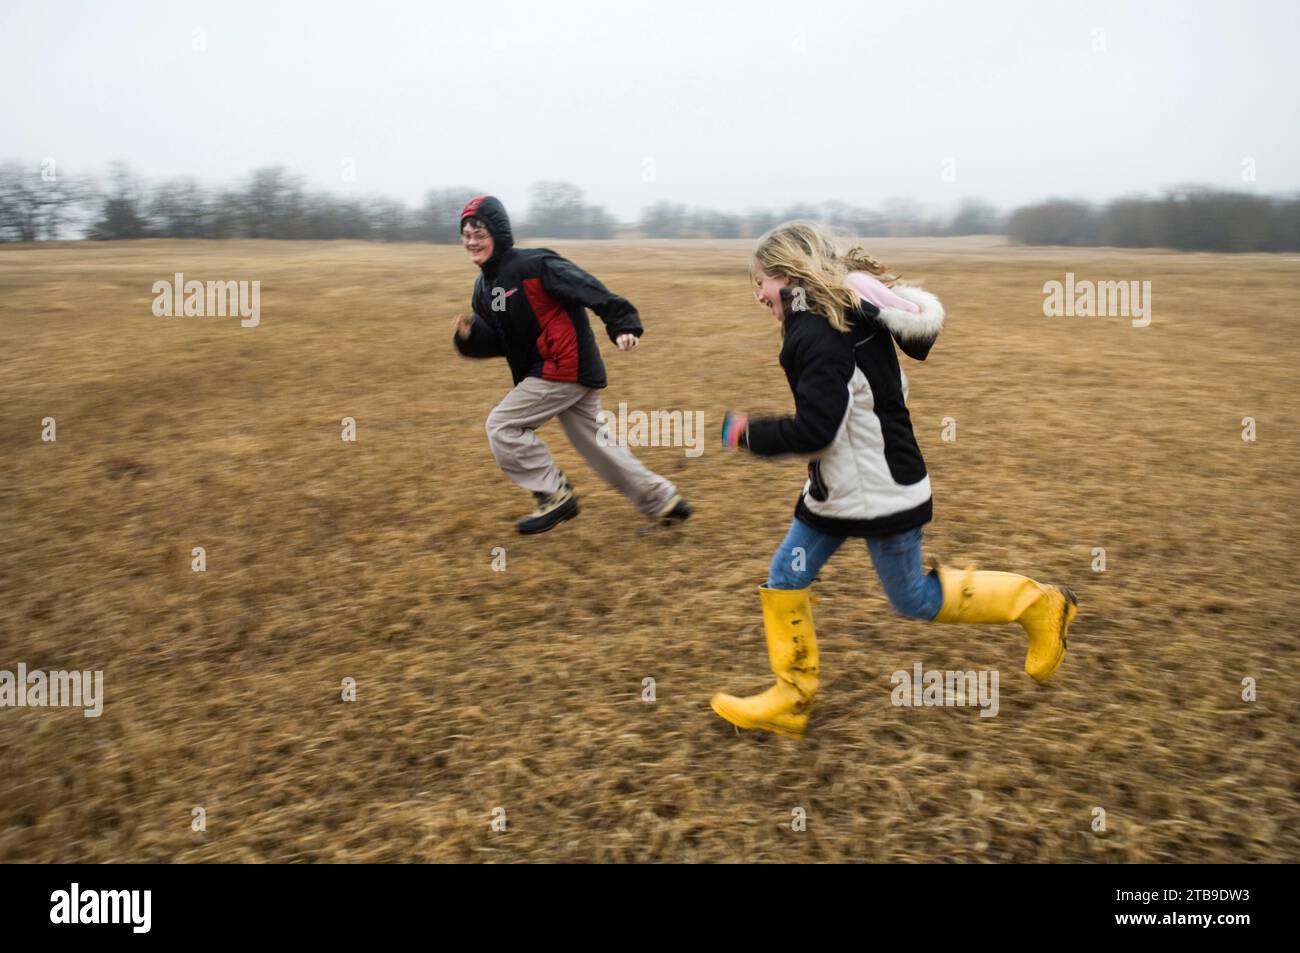 Boy and girl run and chase each other in a field; Lincoln, Nebraska, United States of America. Stock Photo